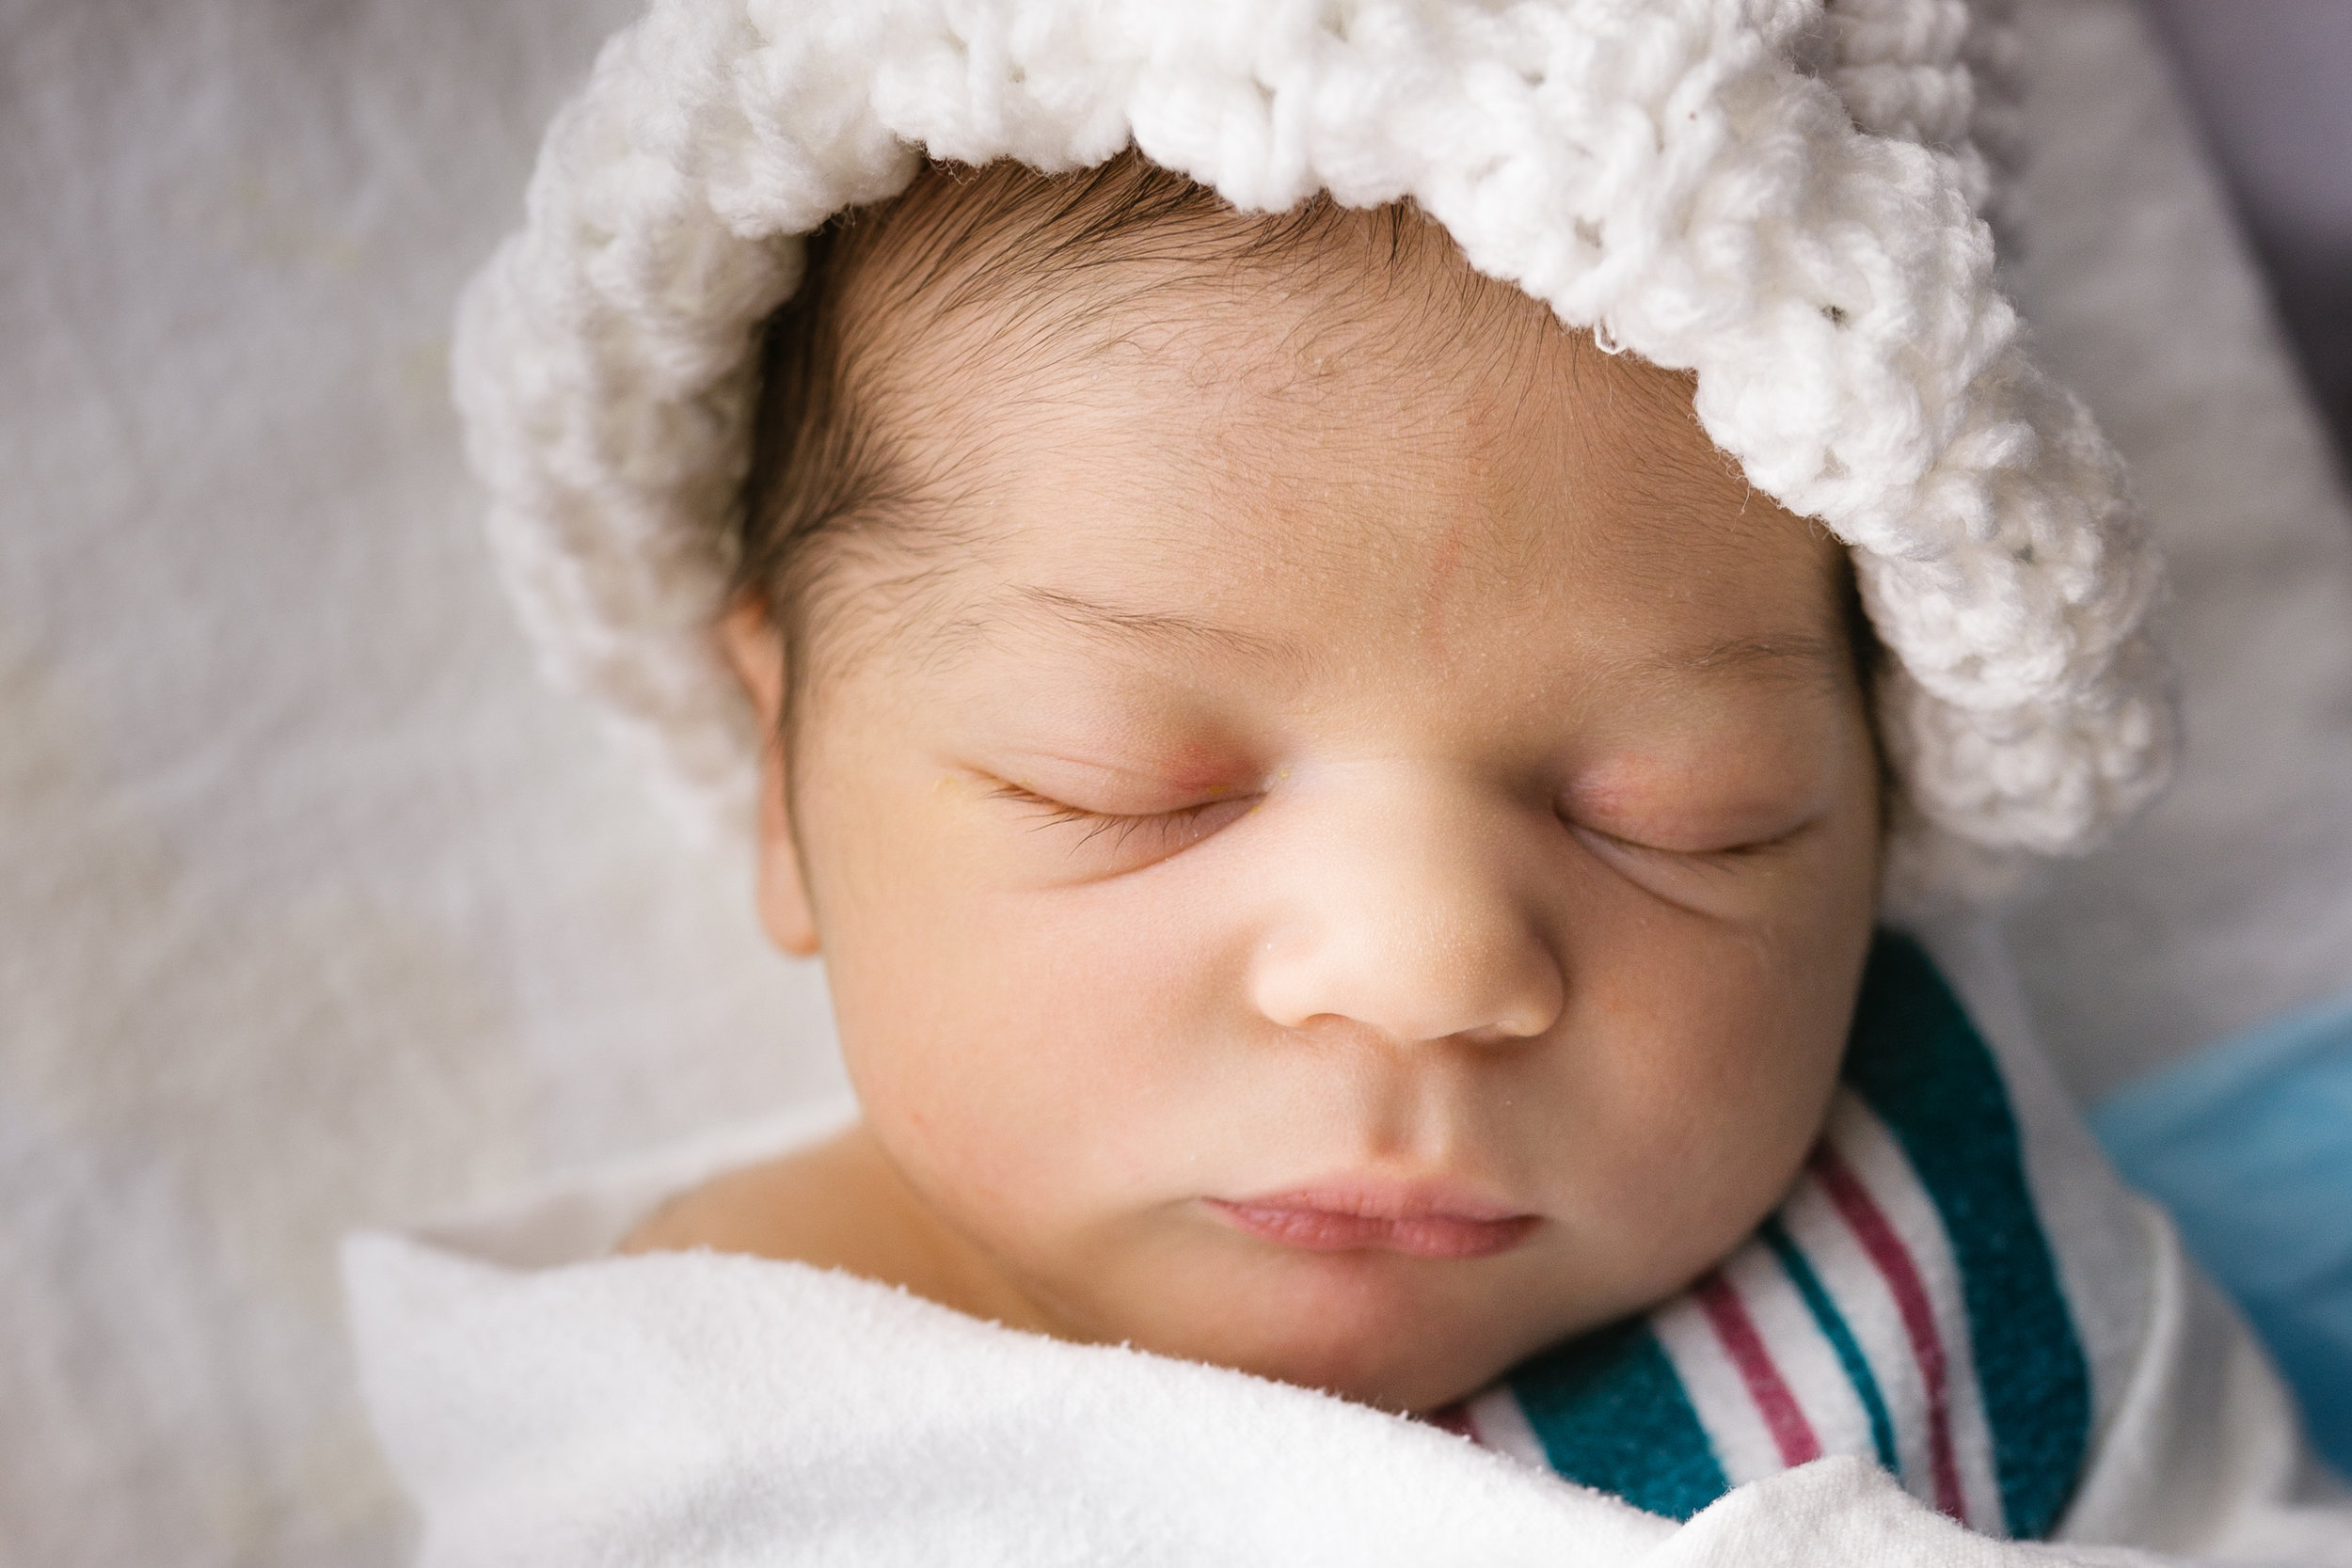 close up photograph of newborn baby boy's face wearing white hat